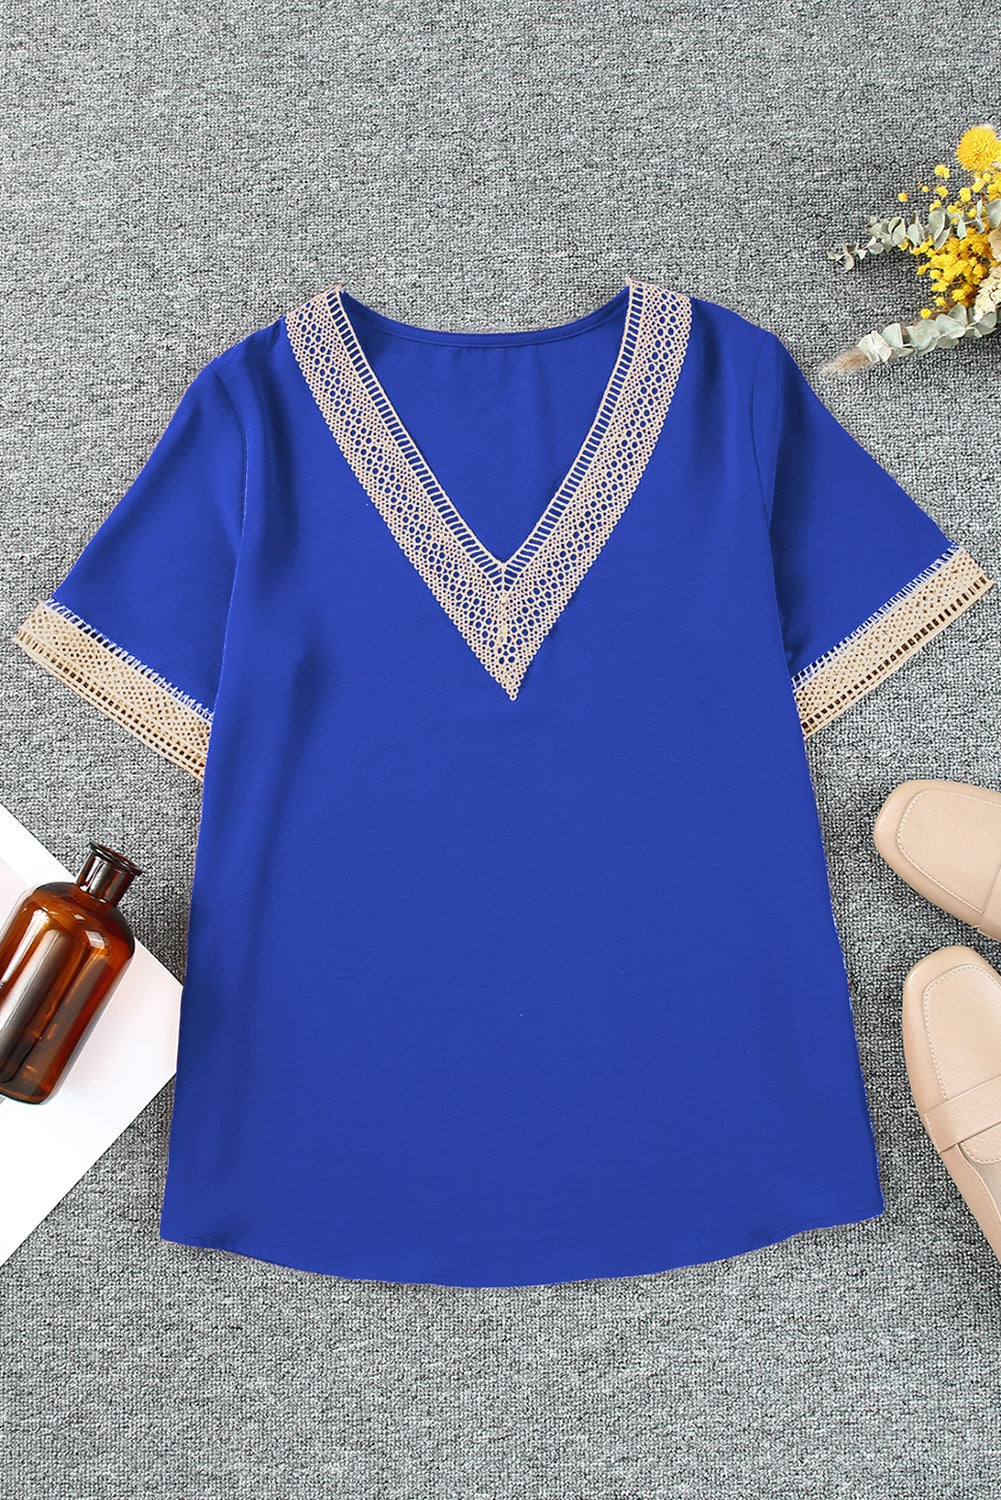 Lace V-Neck Women's Blouse blue product only